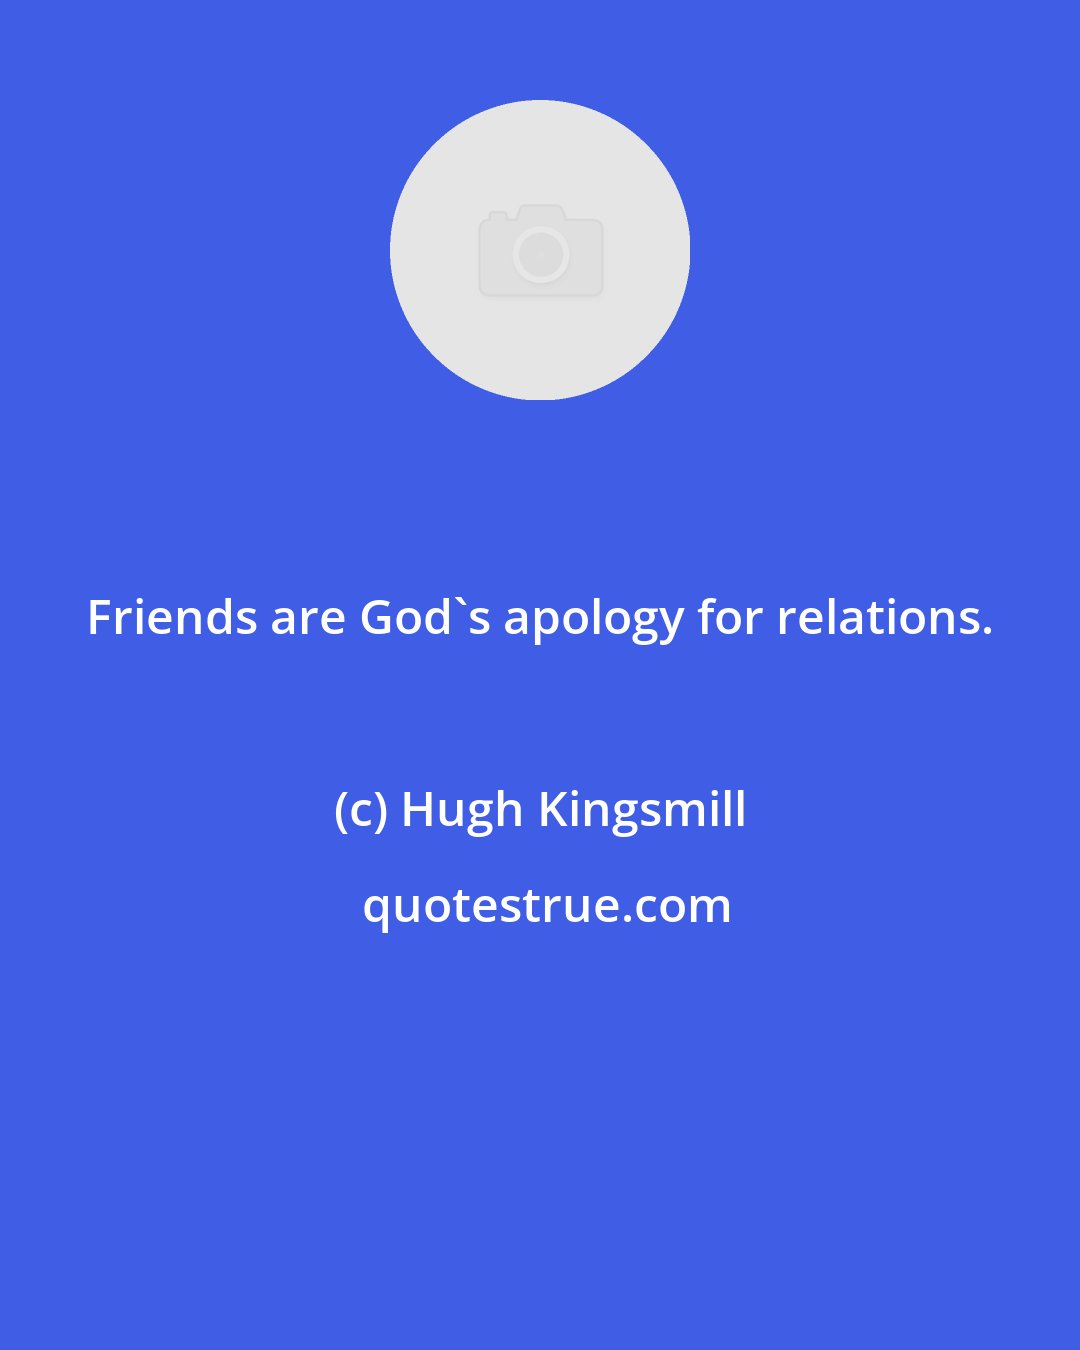 Hugh Kingsmill: Friends are God's apology for relations.